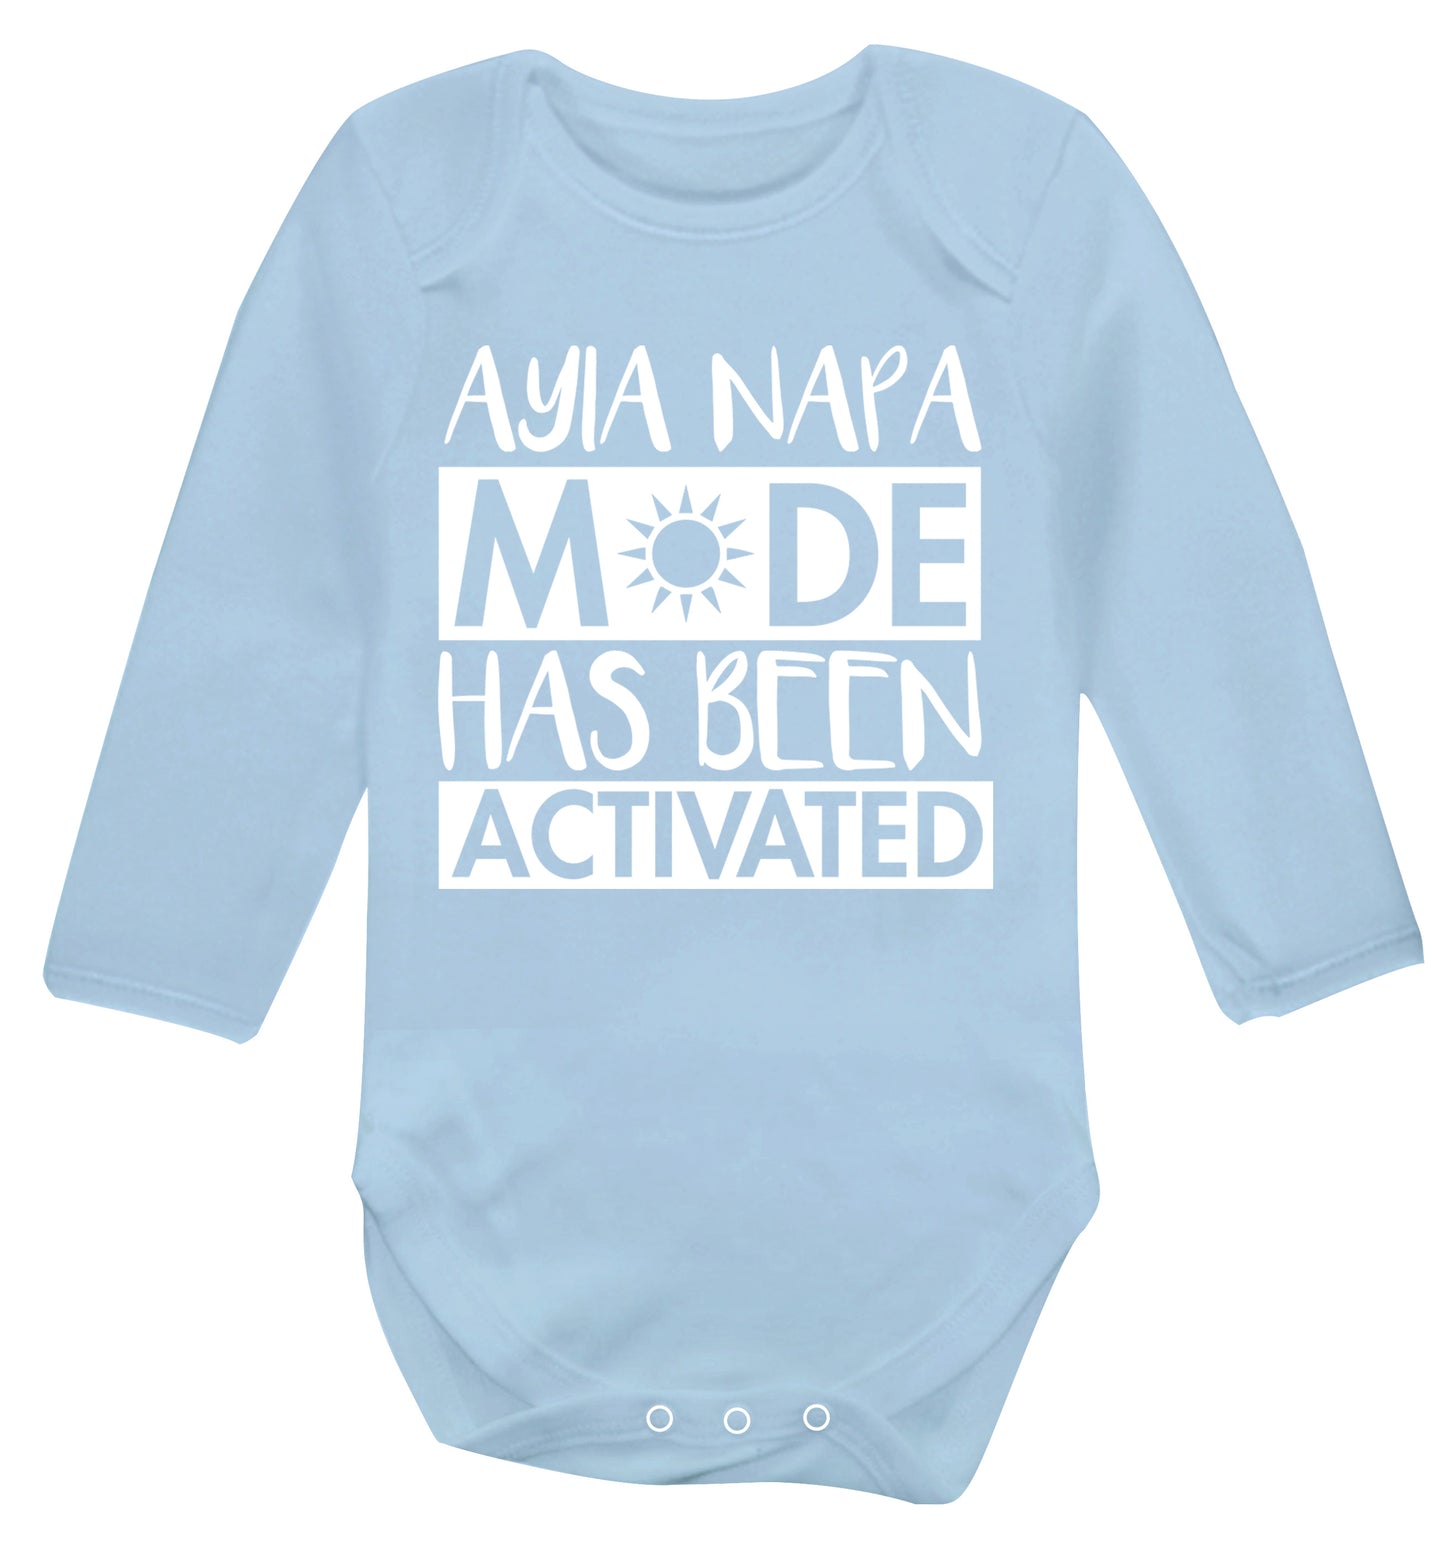 Ayia Napa mode has been activated Baby Vest long sleeved pale blue 6-12 months